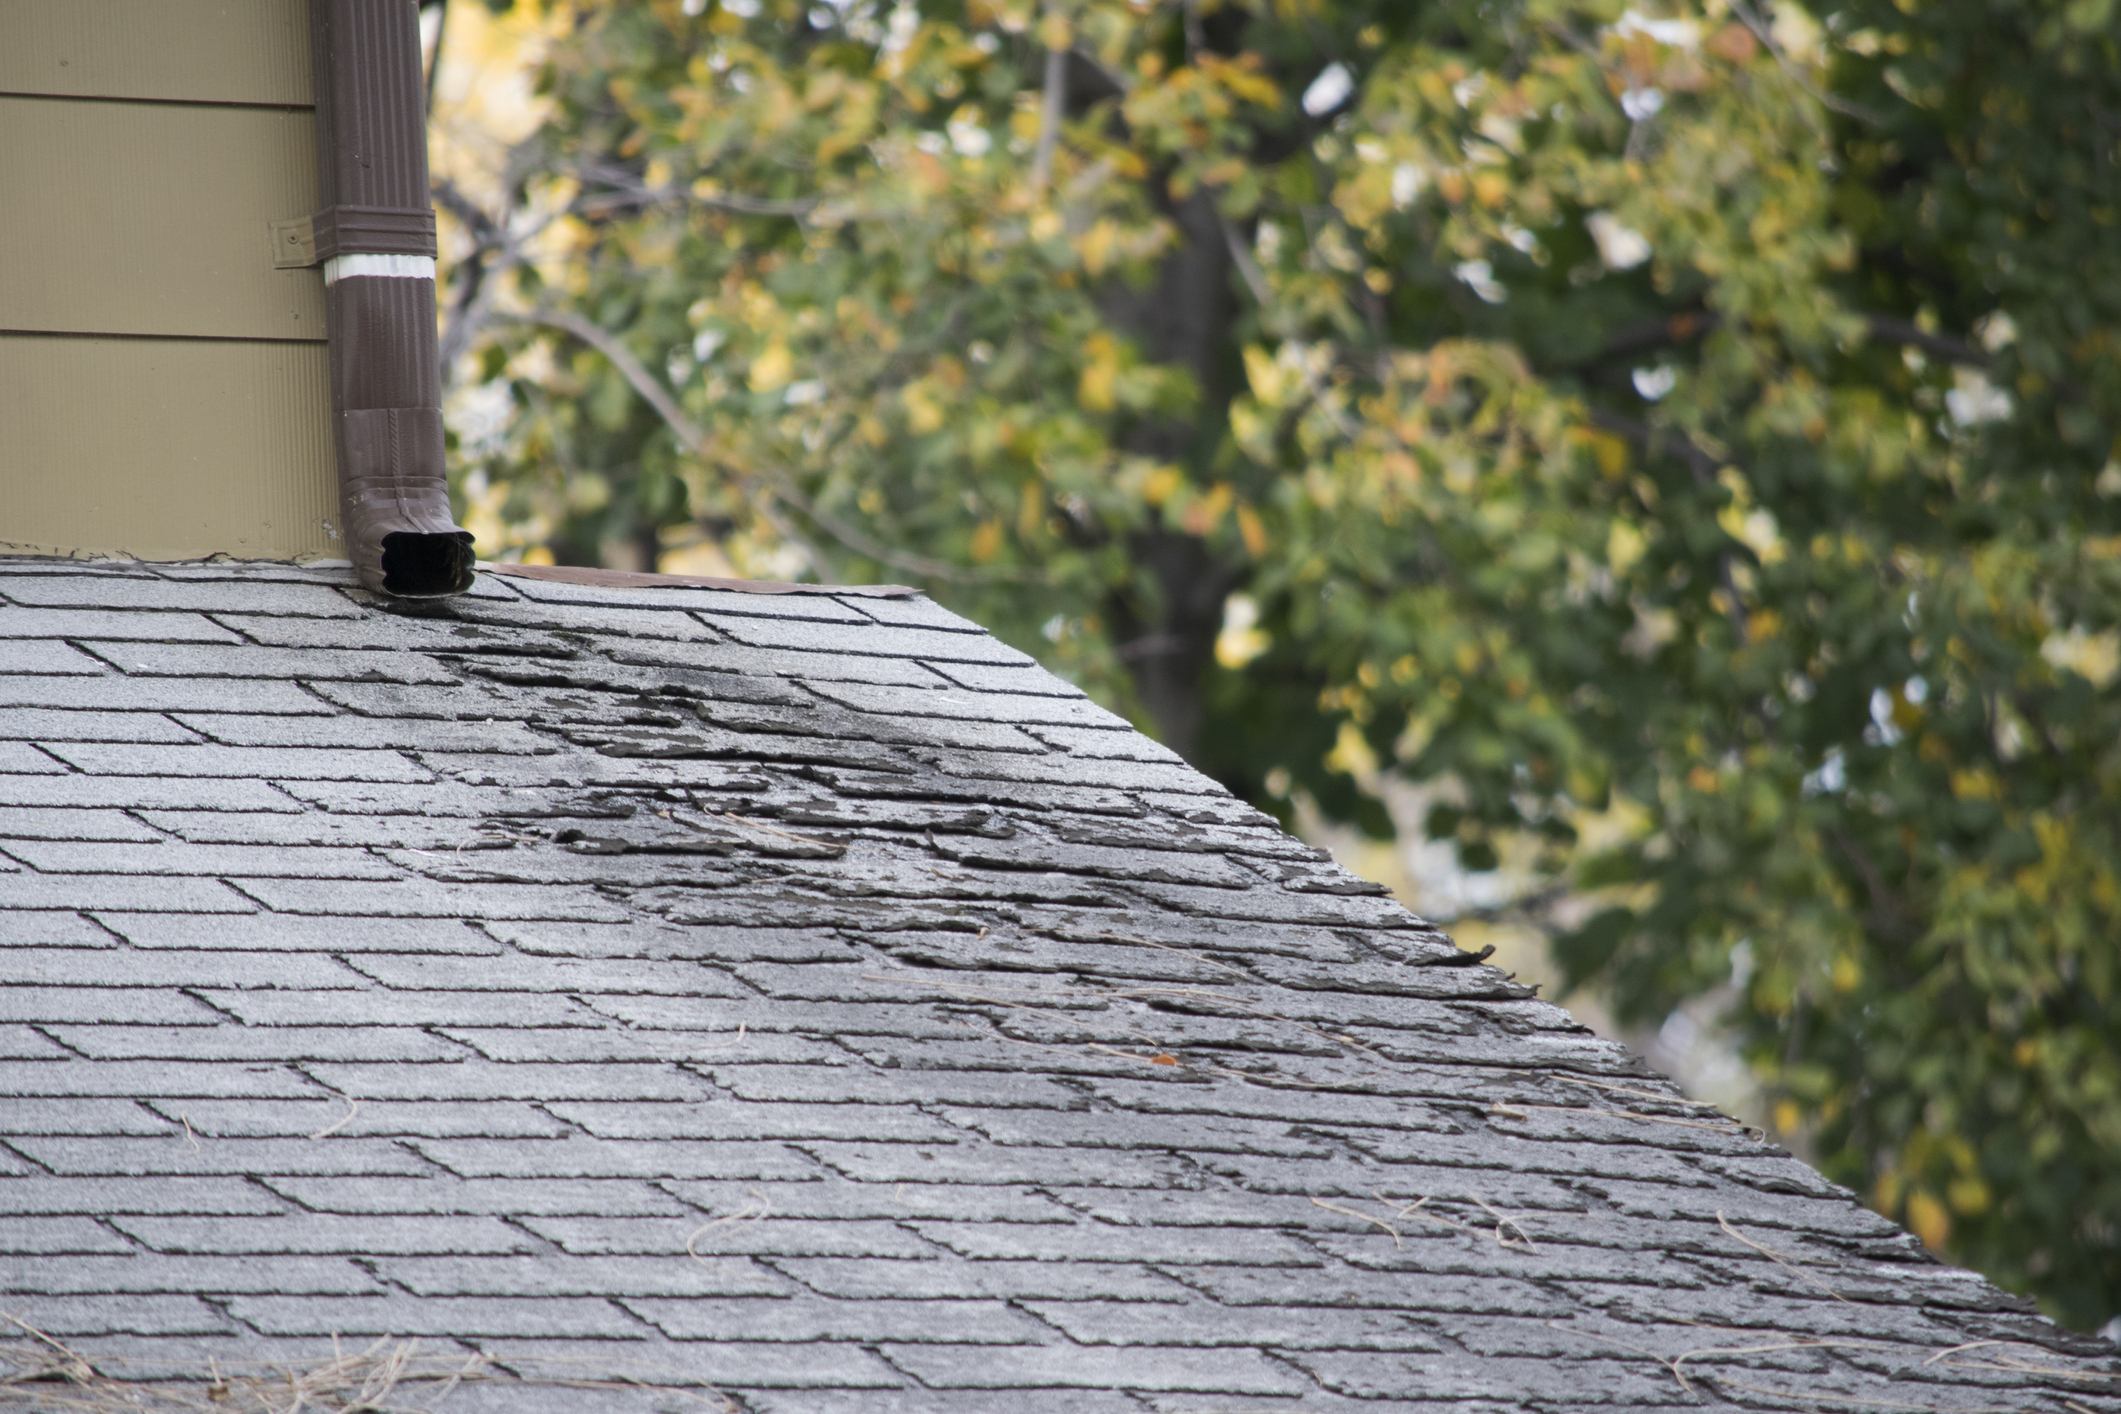 How Old Should a Roof Be Before Replacing?